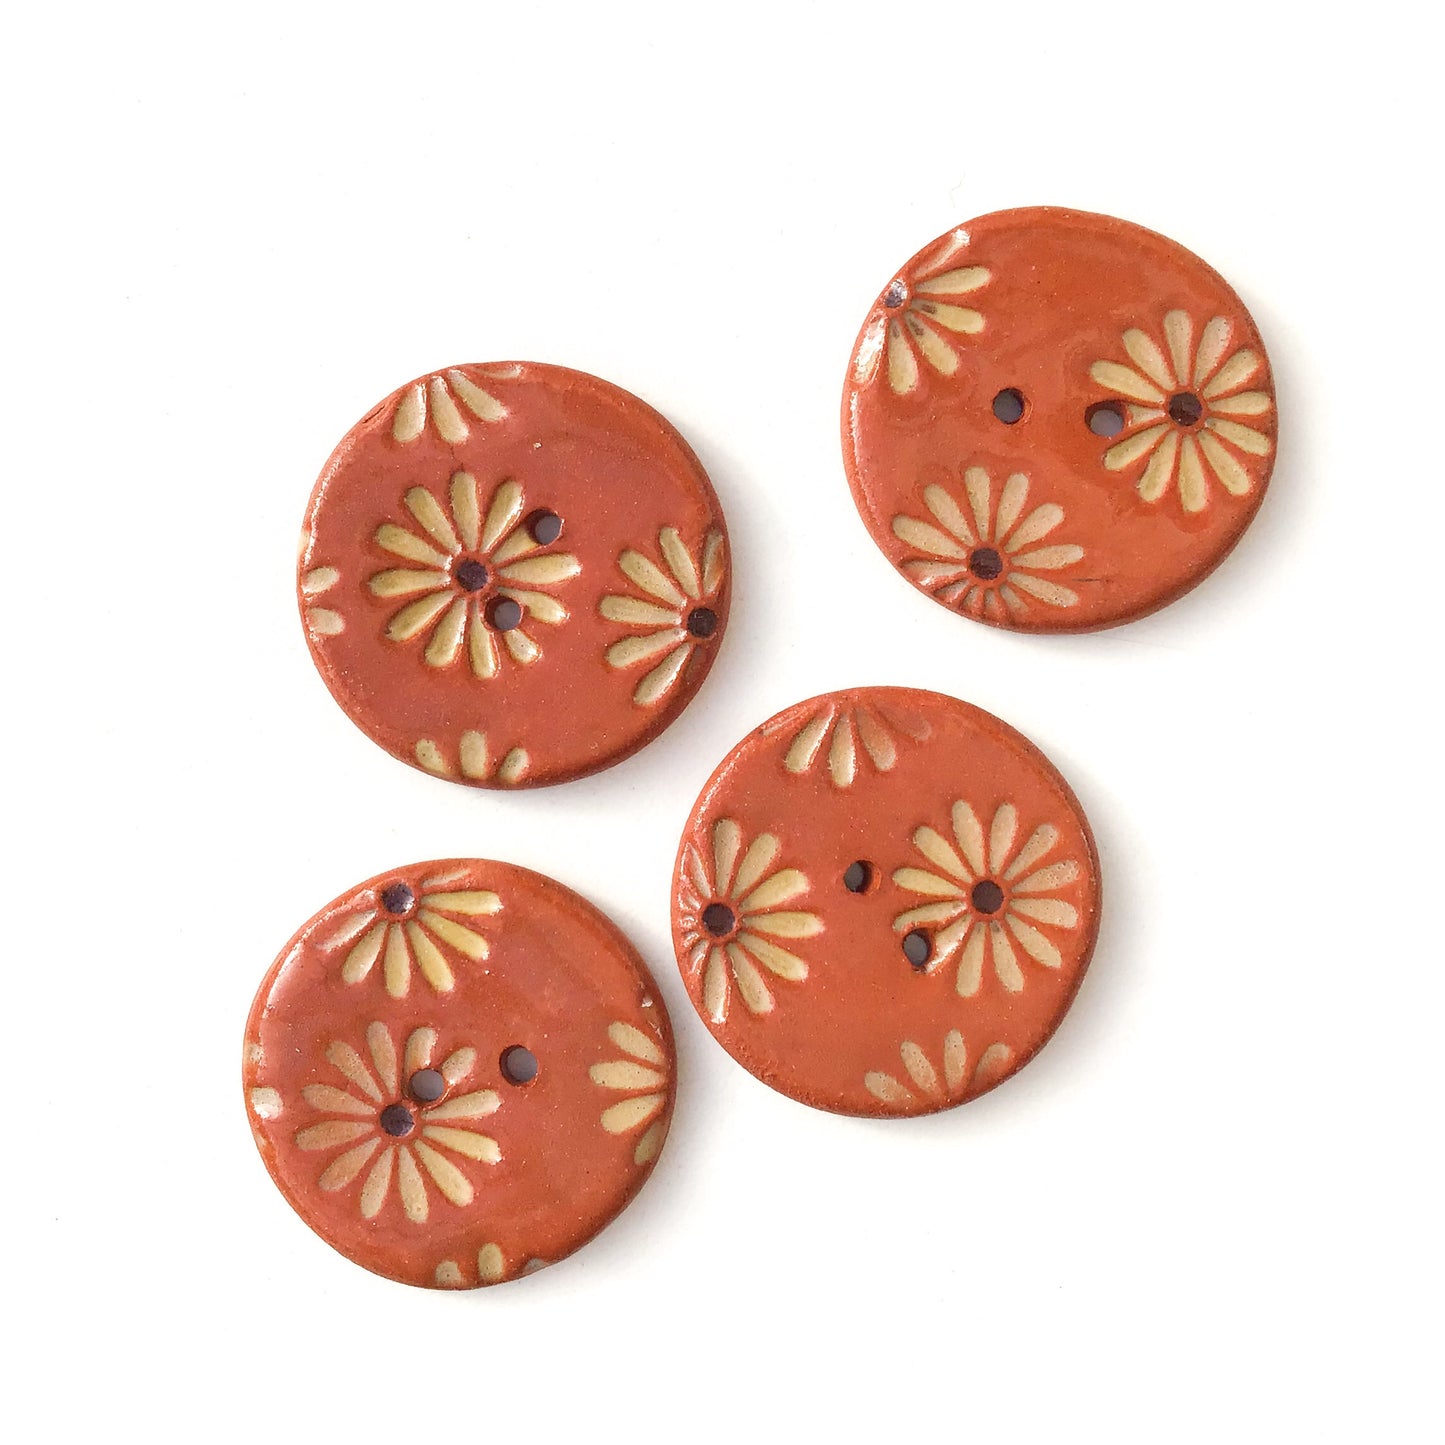 Gold Daisy Buttons on Red Clay - 1 1/16" - 4 Pack